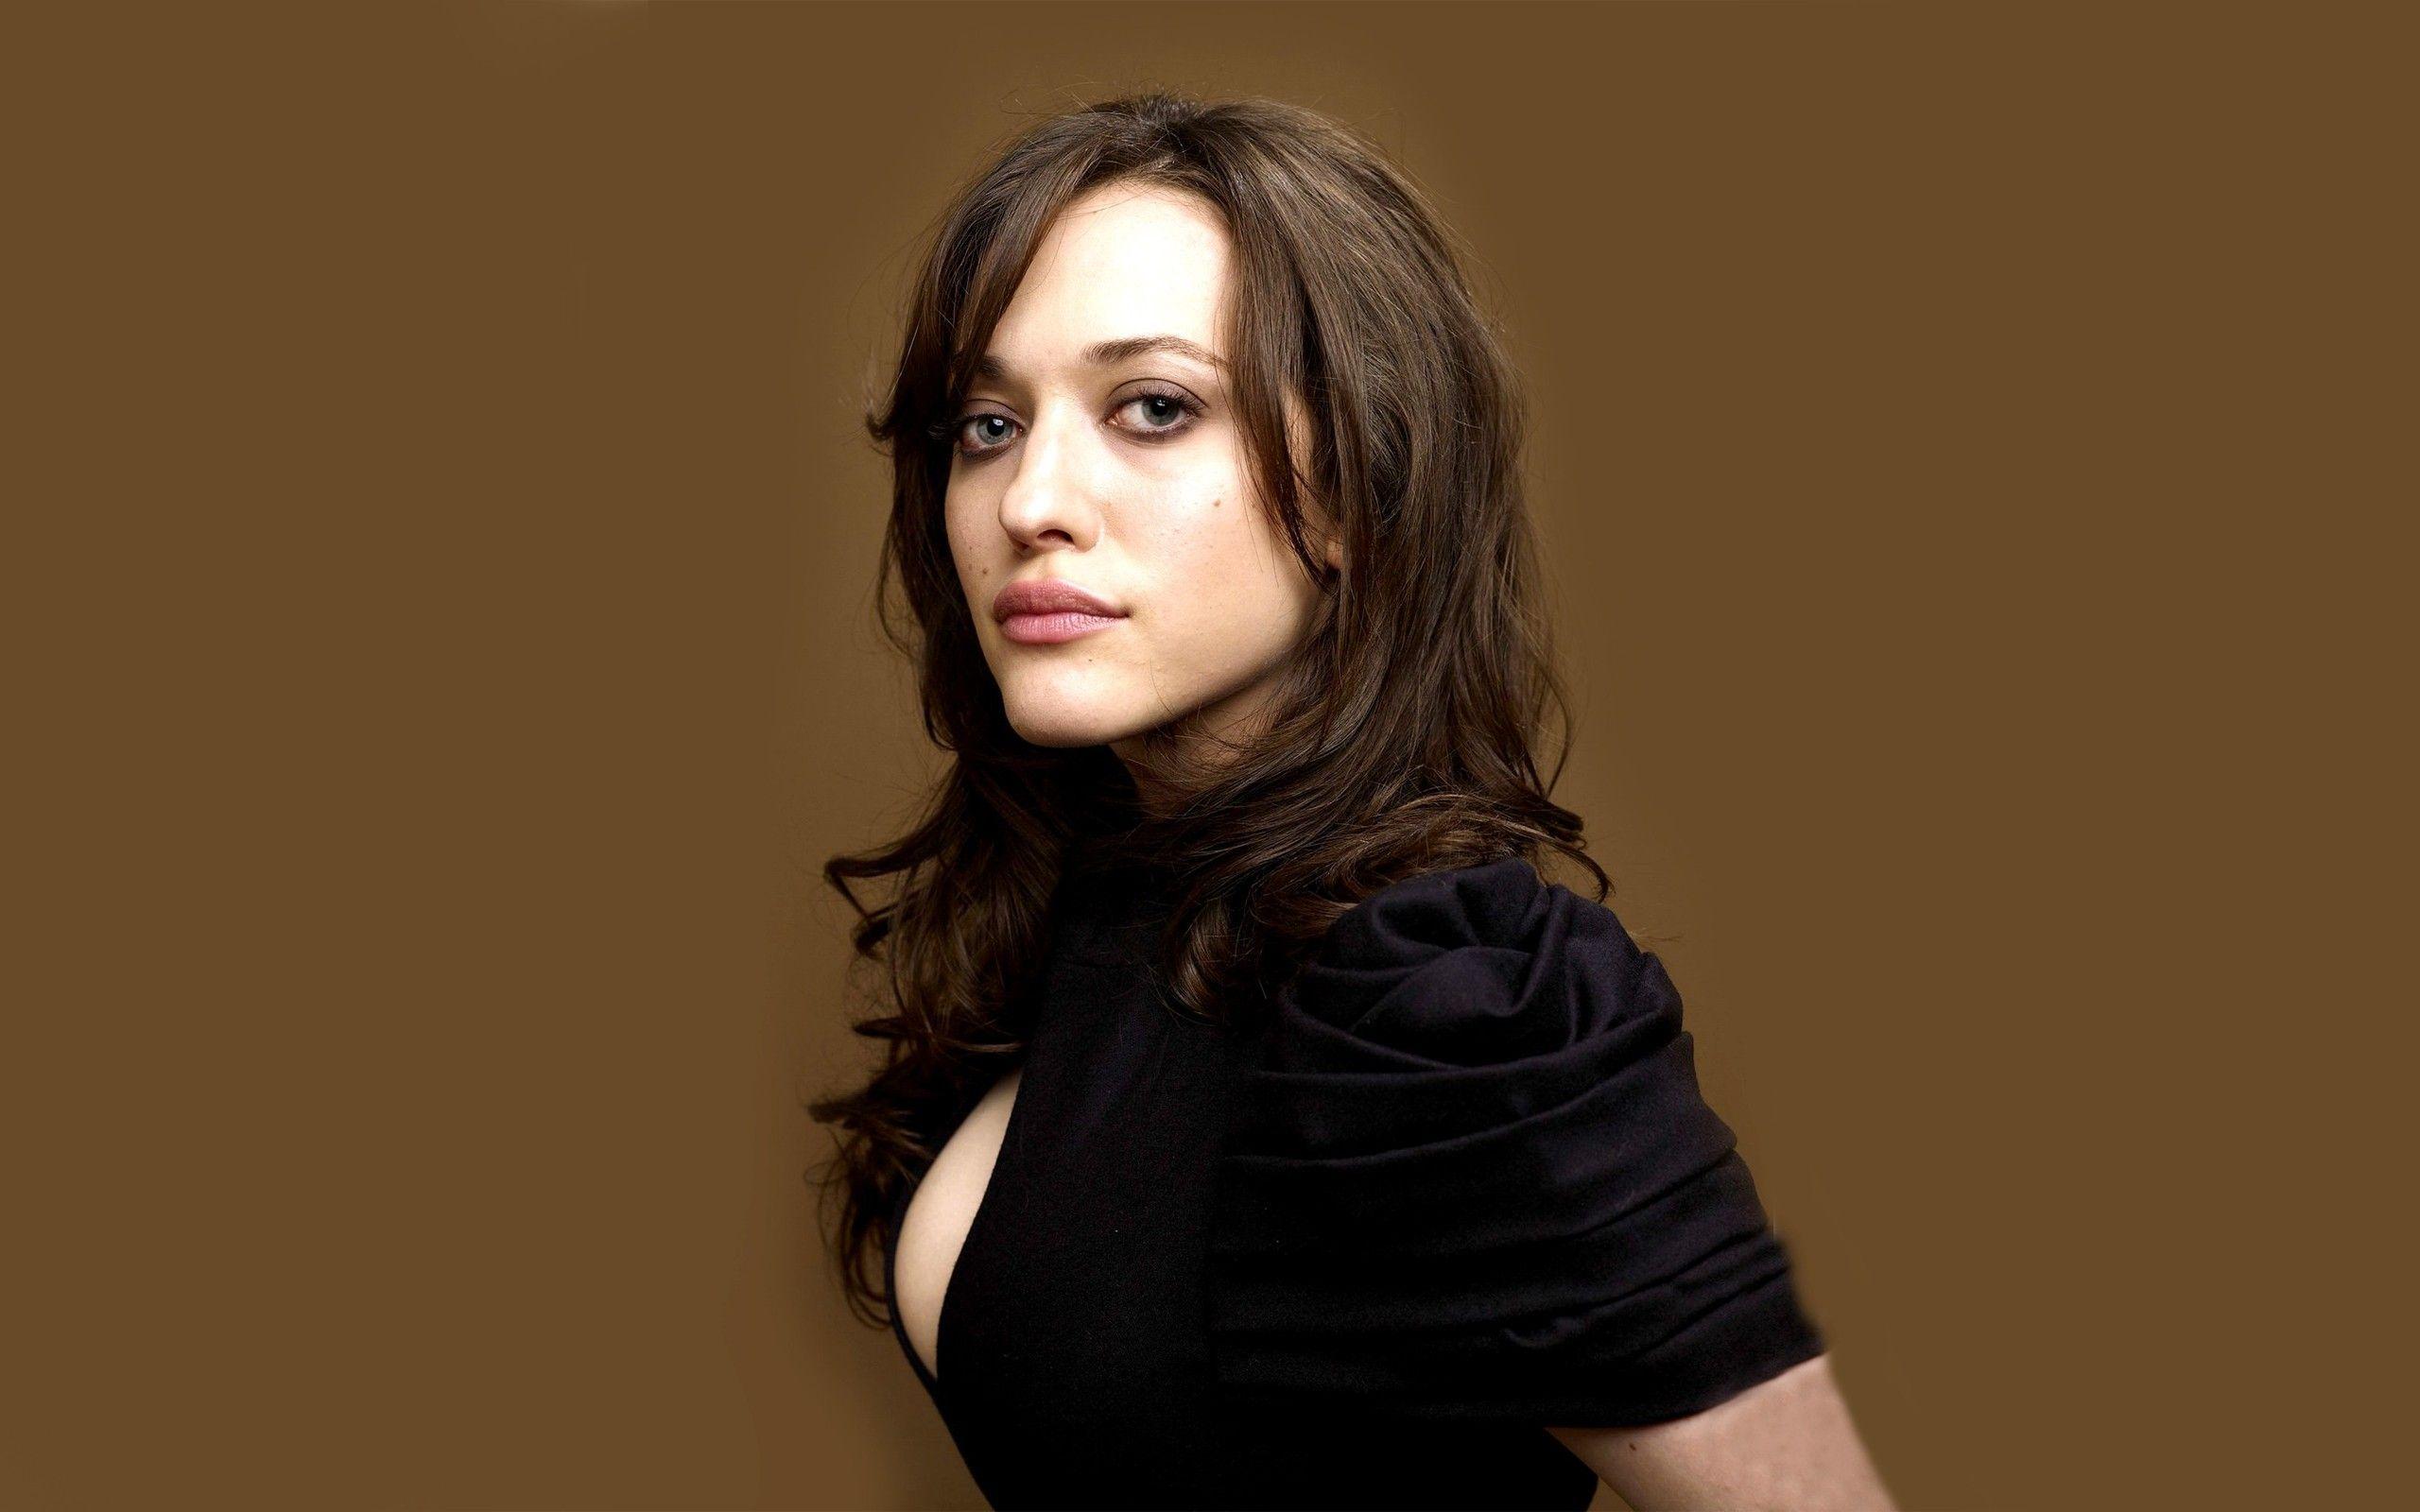 The House Bunny Kat Dennings Background. Free Download Wallpaper